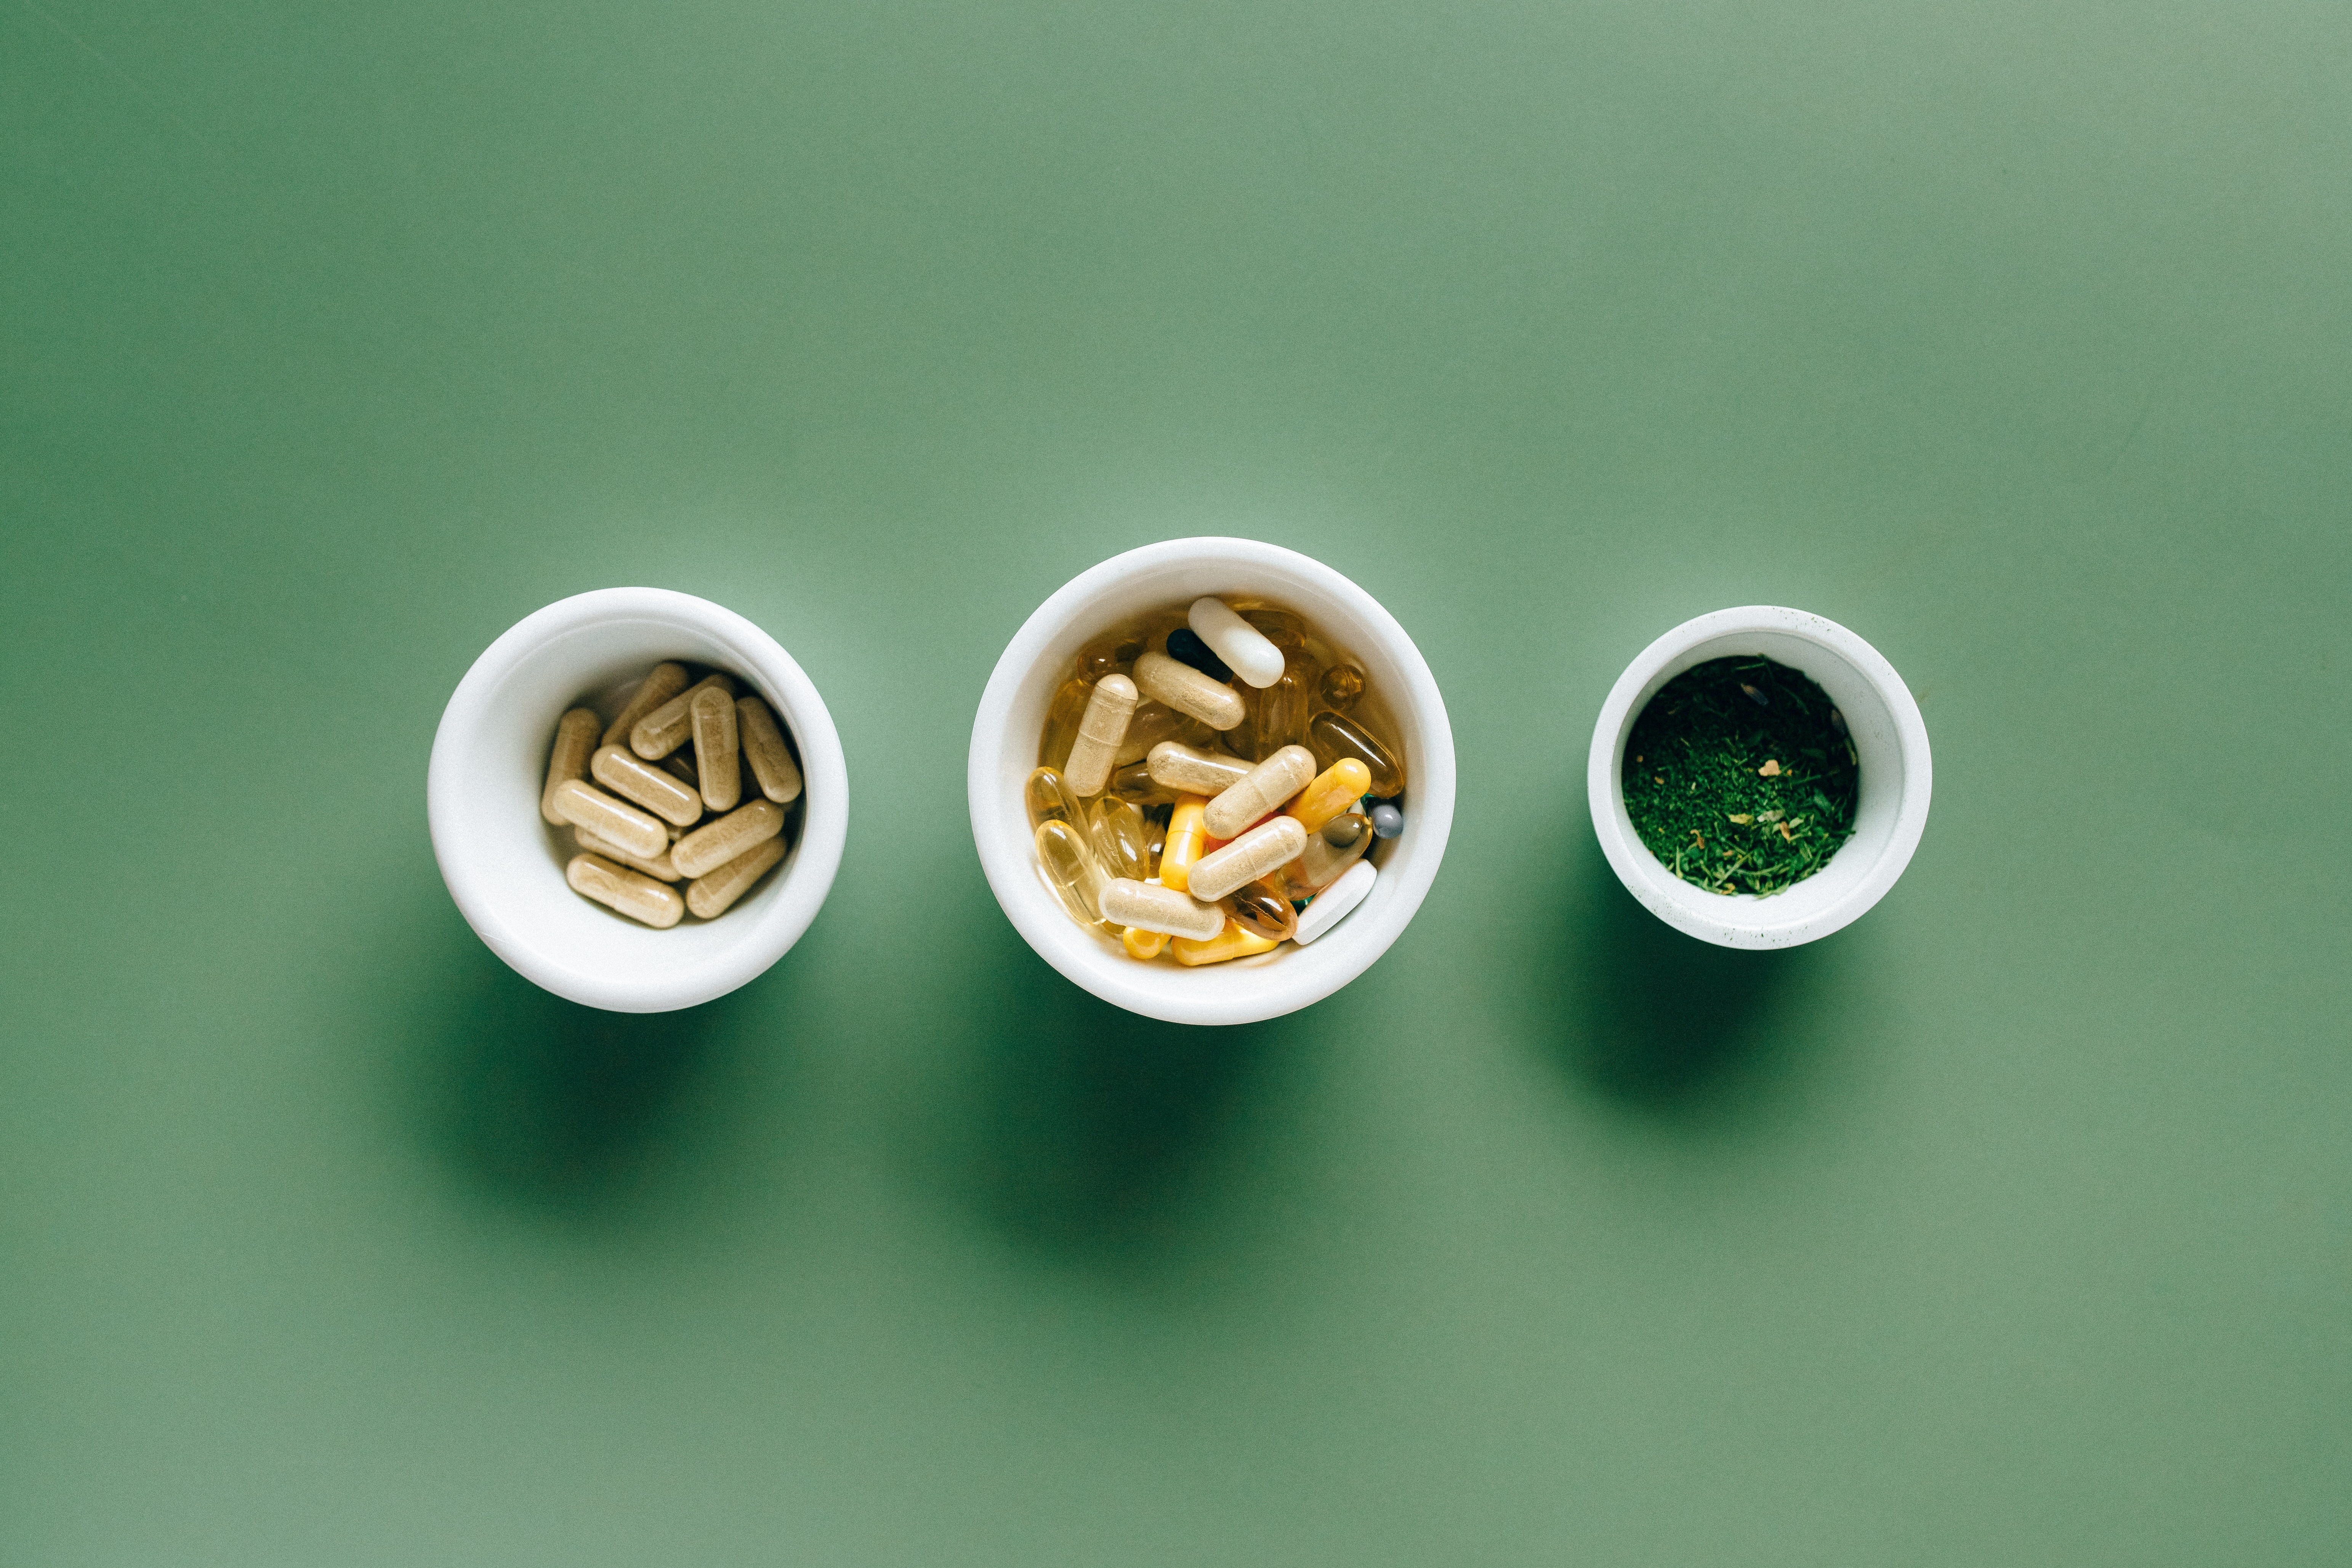 Herbal Supplements in Small White Bowls